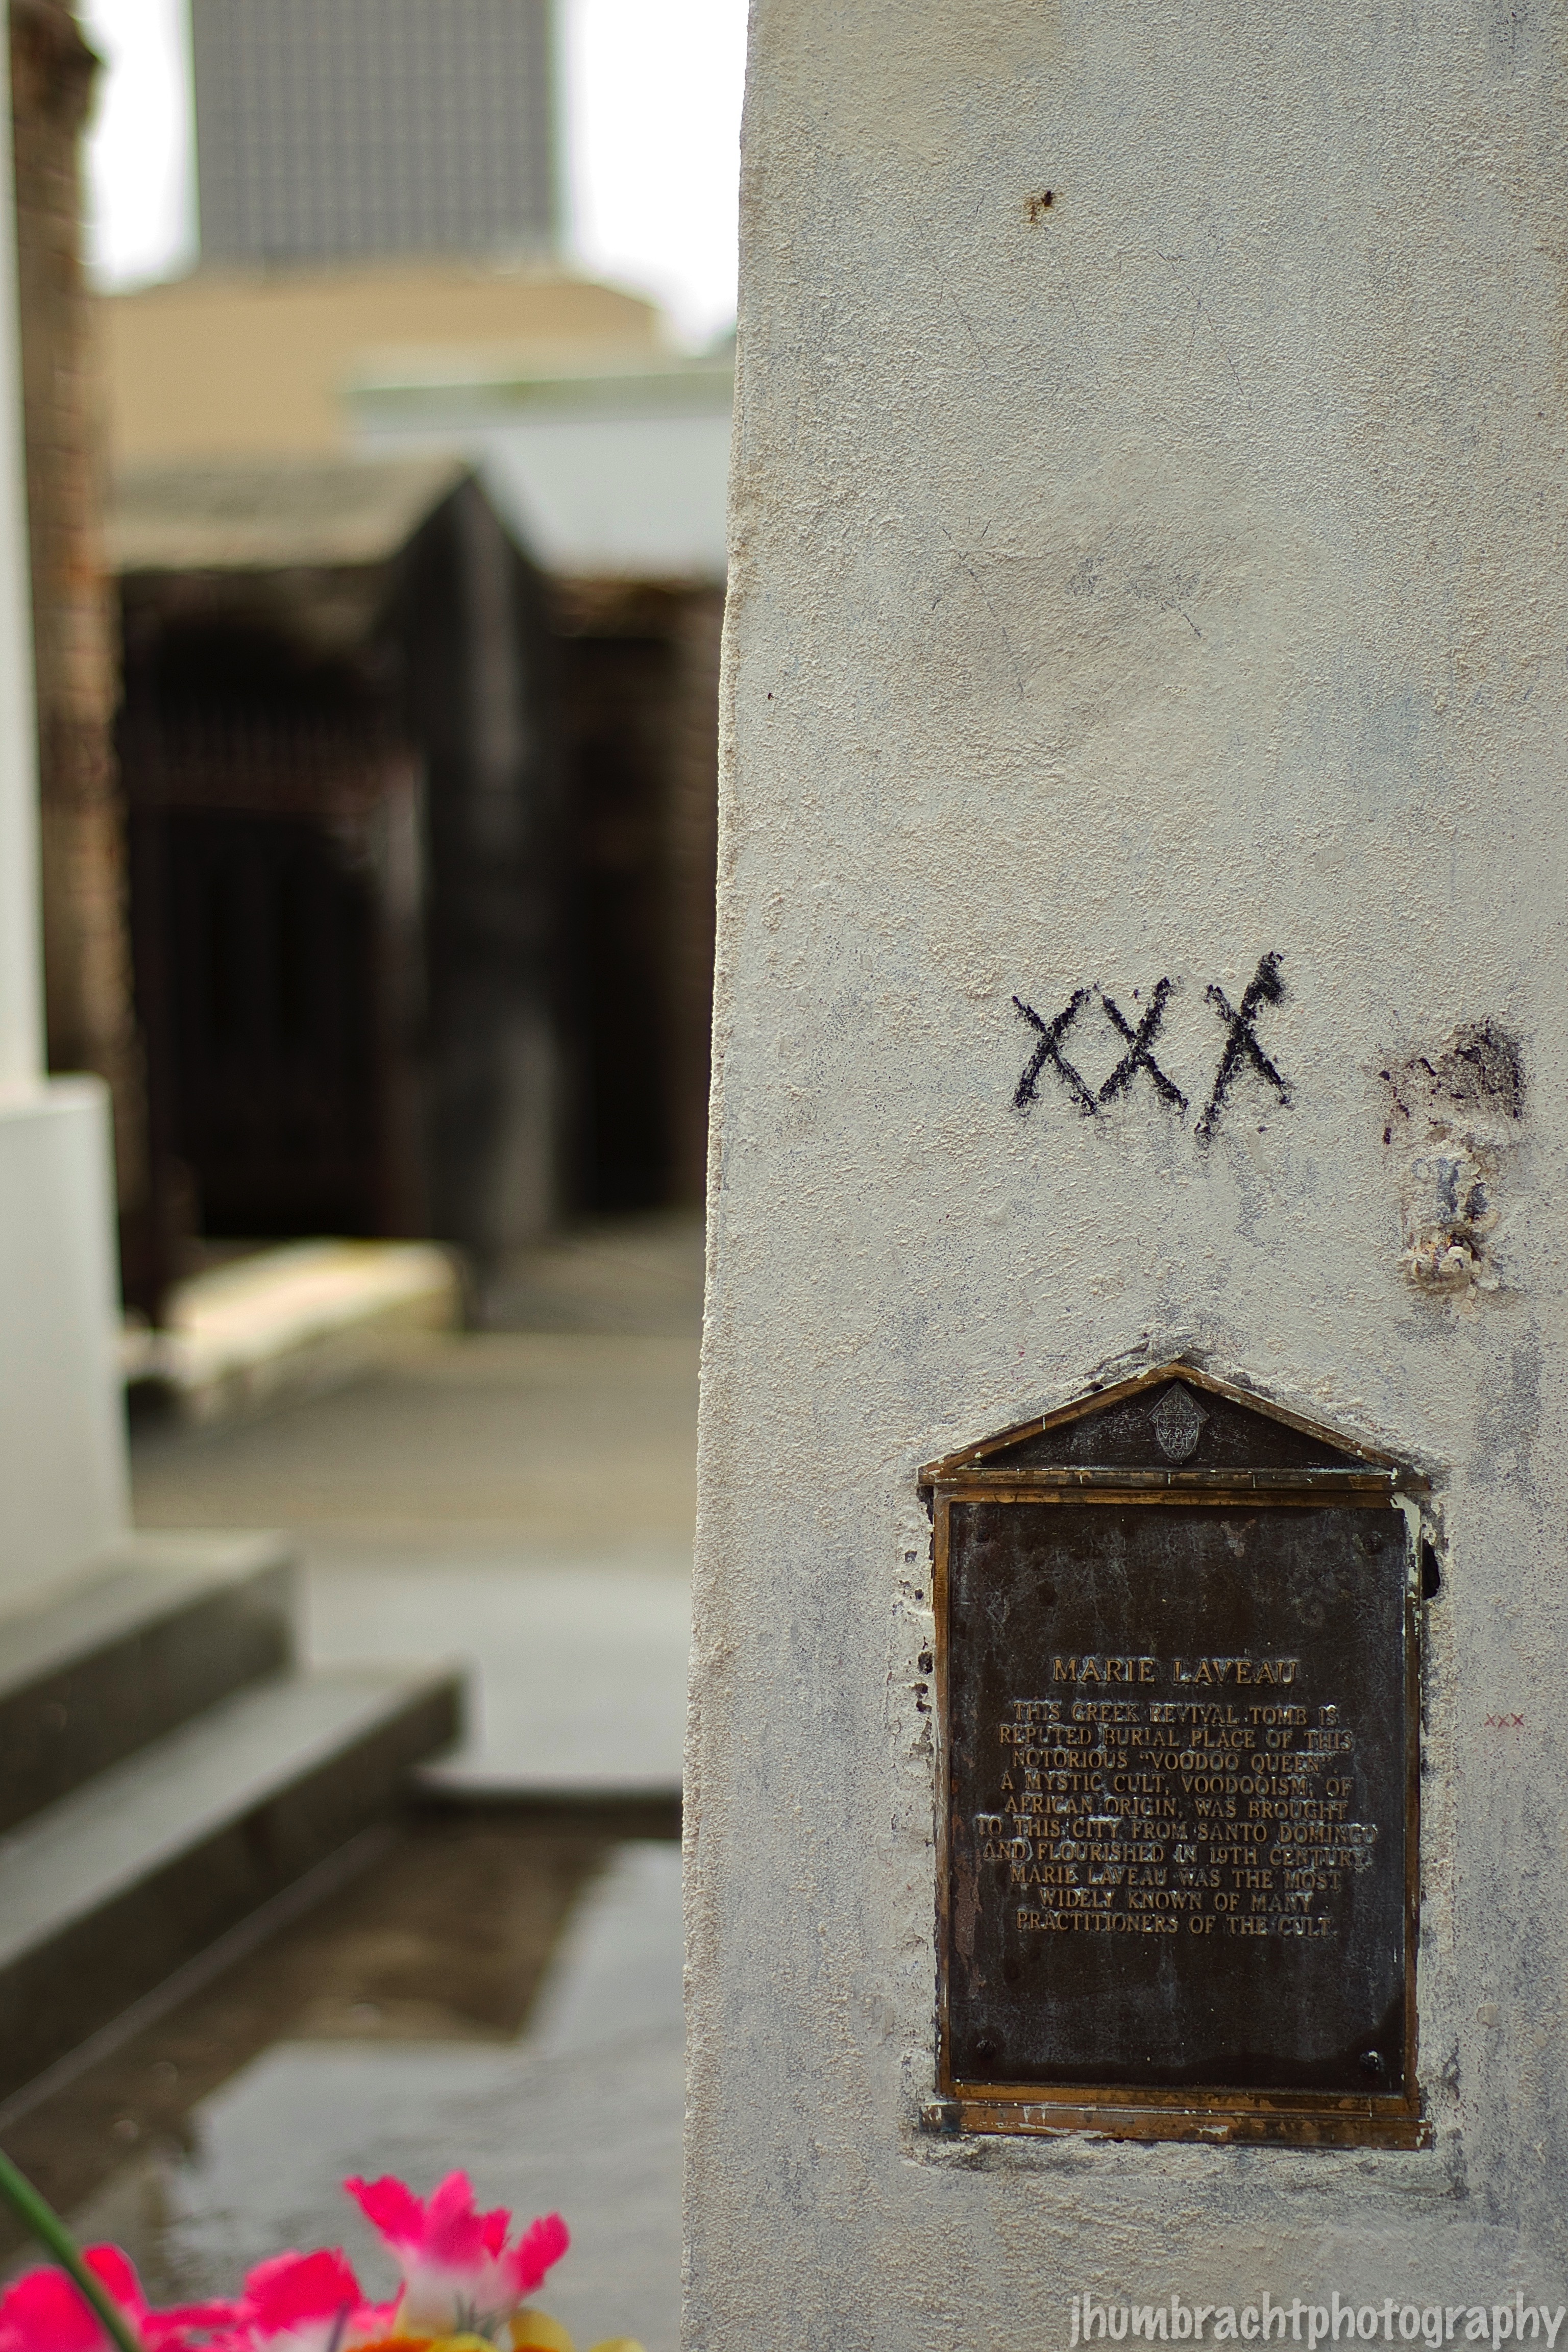 Marie Laveau | Saint Louis Cemetery Number One | New Orleans, Louisiana | Photo taken by Indianapolis-based Architectural Photographer Jason Humbracht 